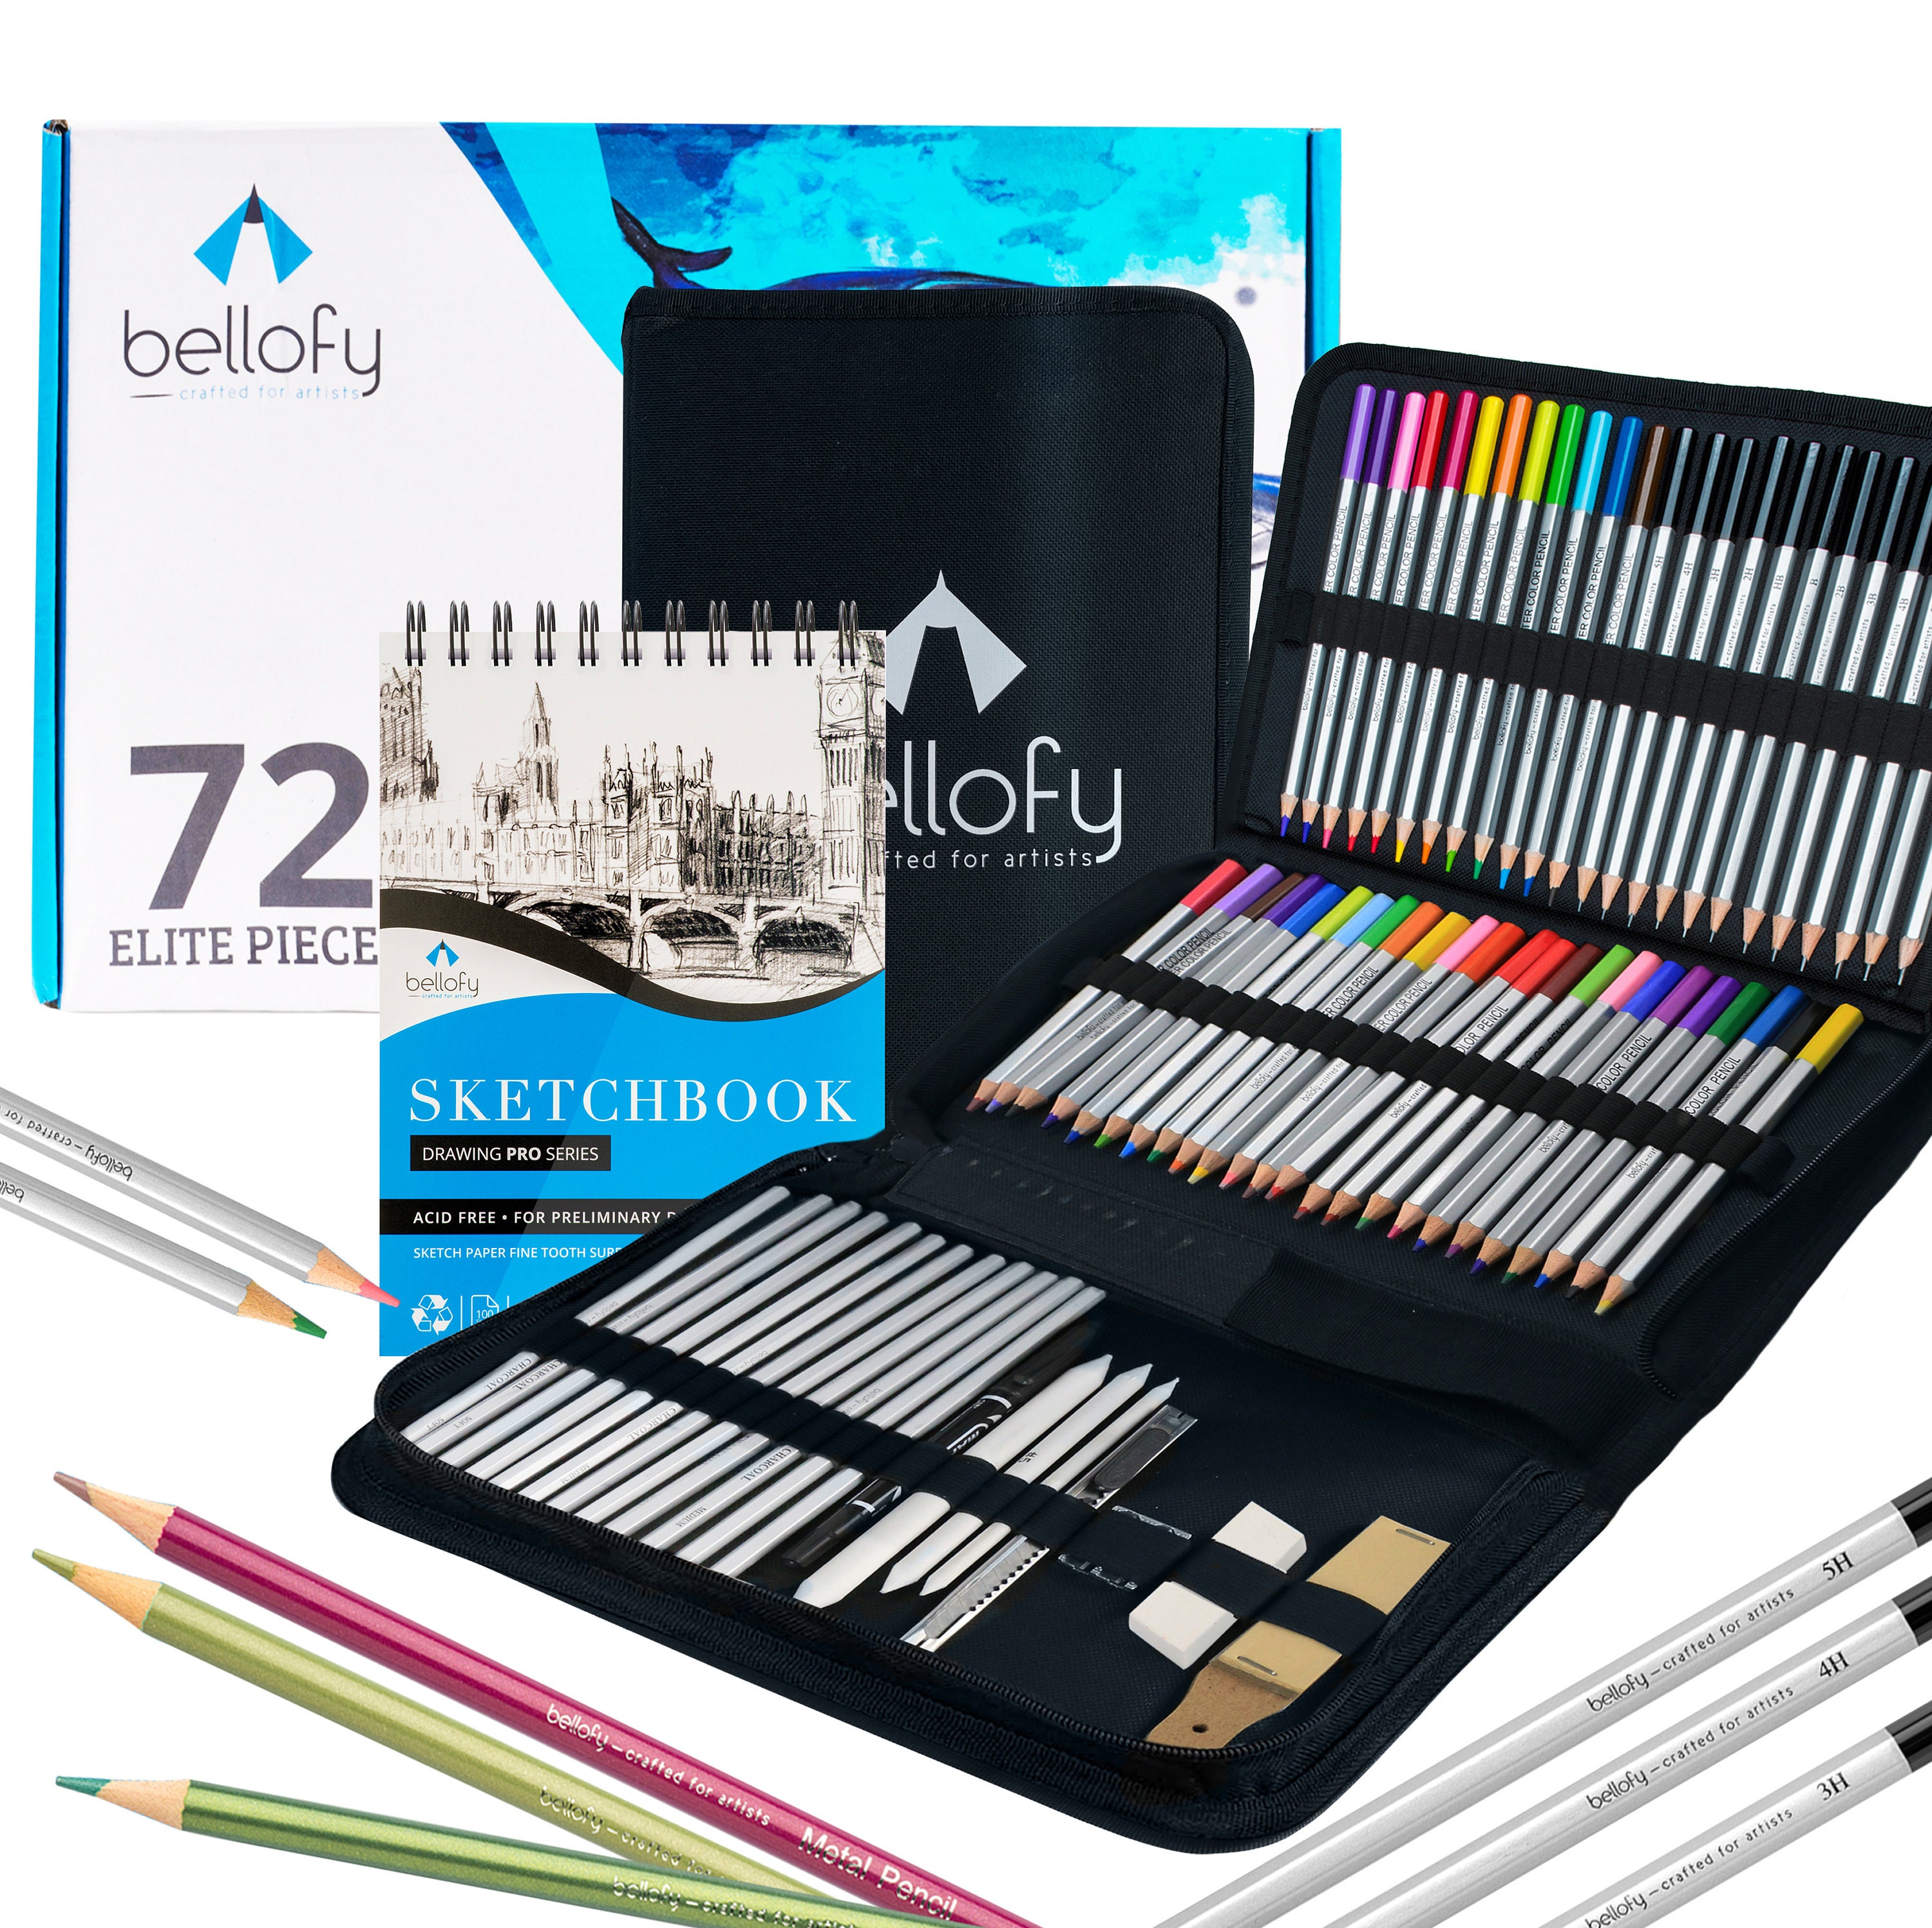 Glokers 72-Piece Arts Supplies and Drawing Kit Set - Complete Set of Art  Pencils: Graphite, Colored, Metallic, Charcoal, Watercolor - Also Includes